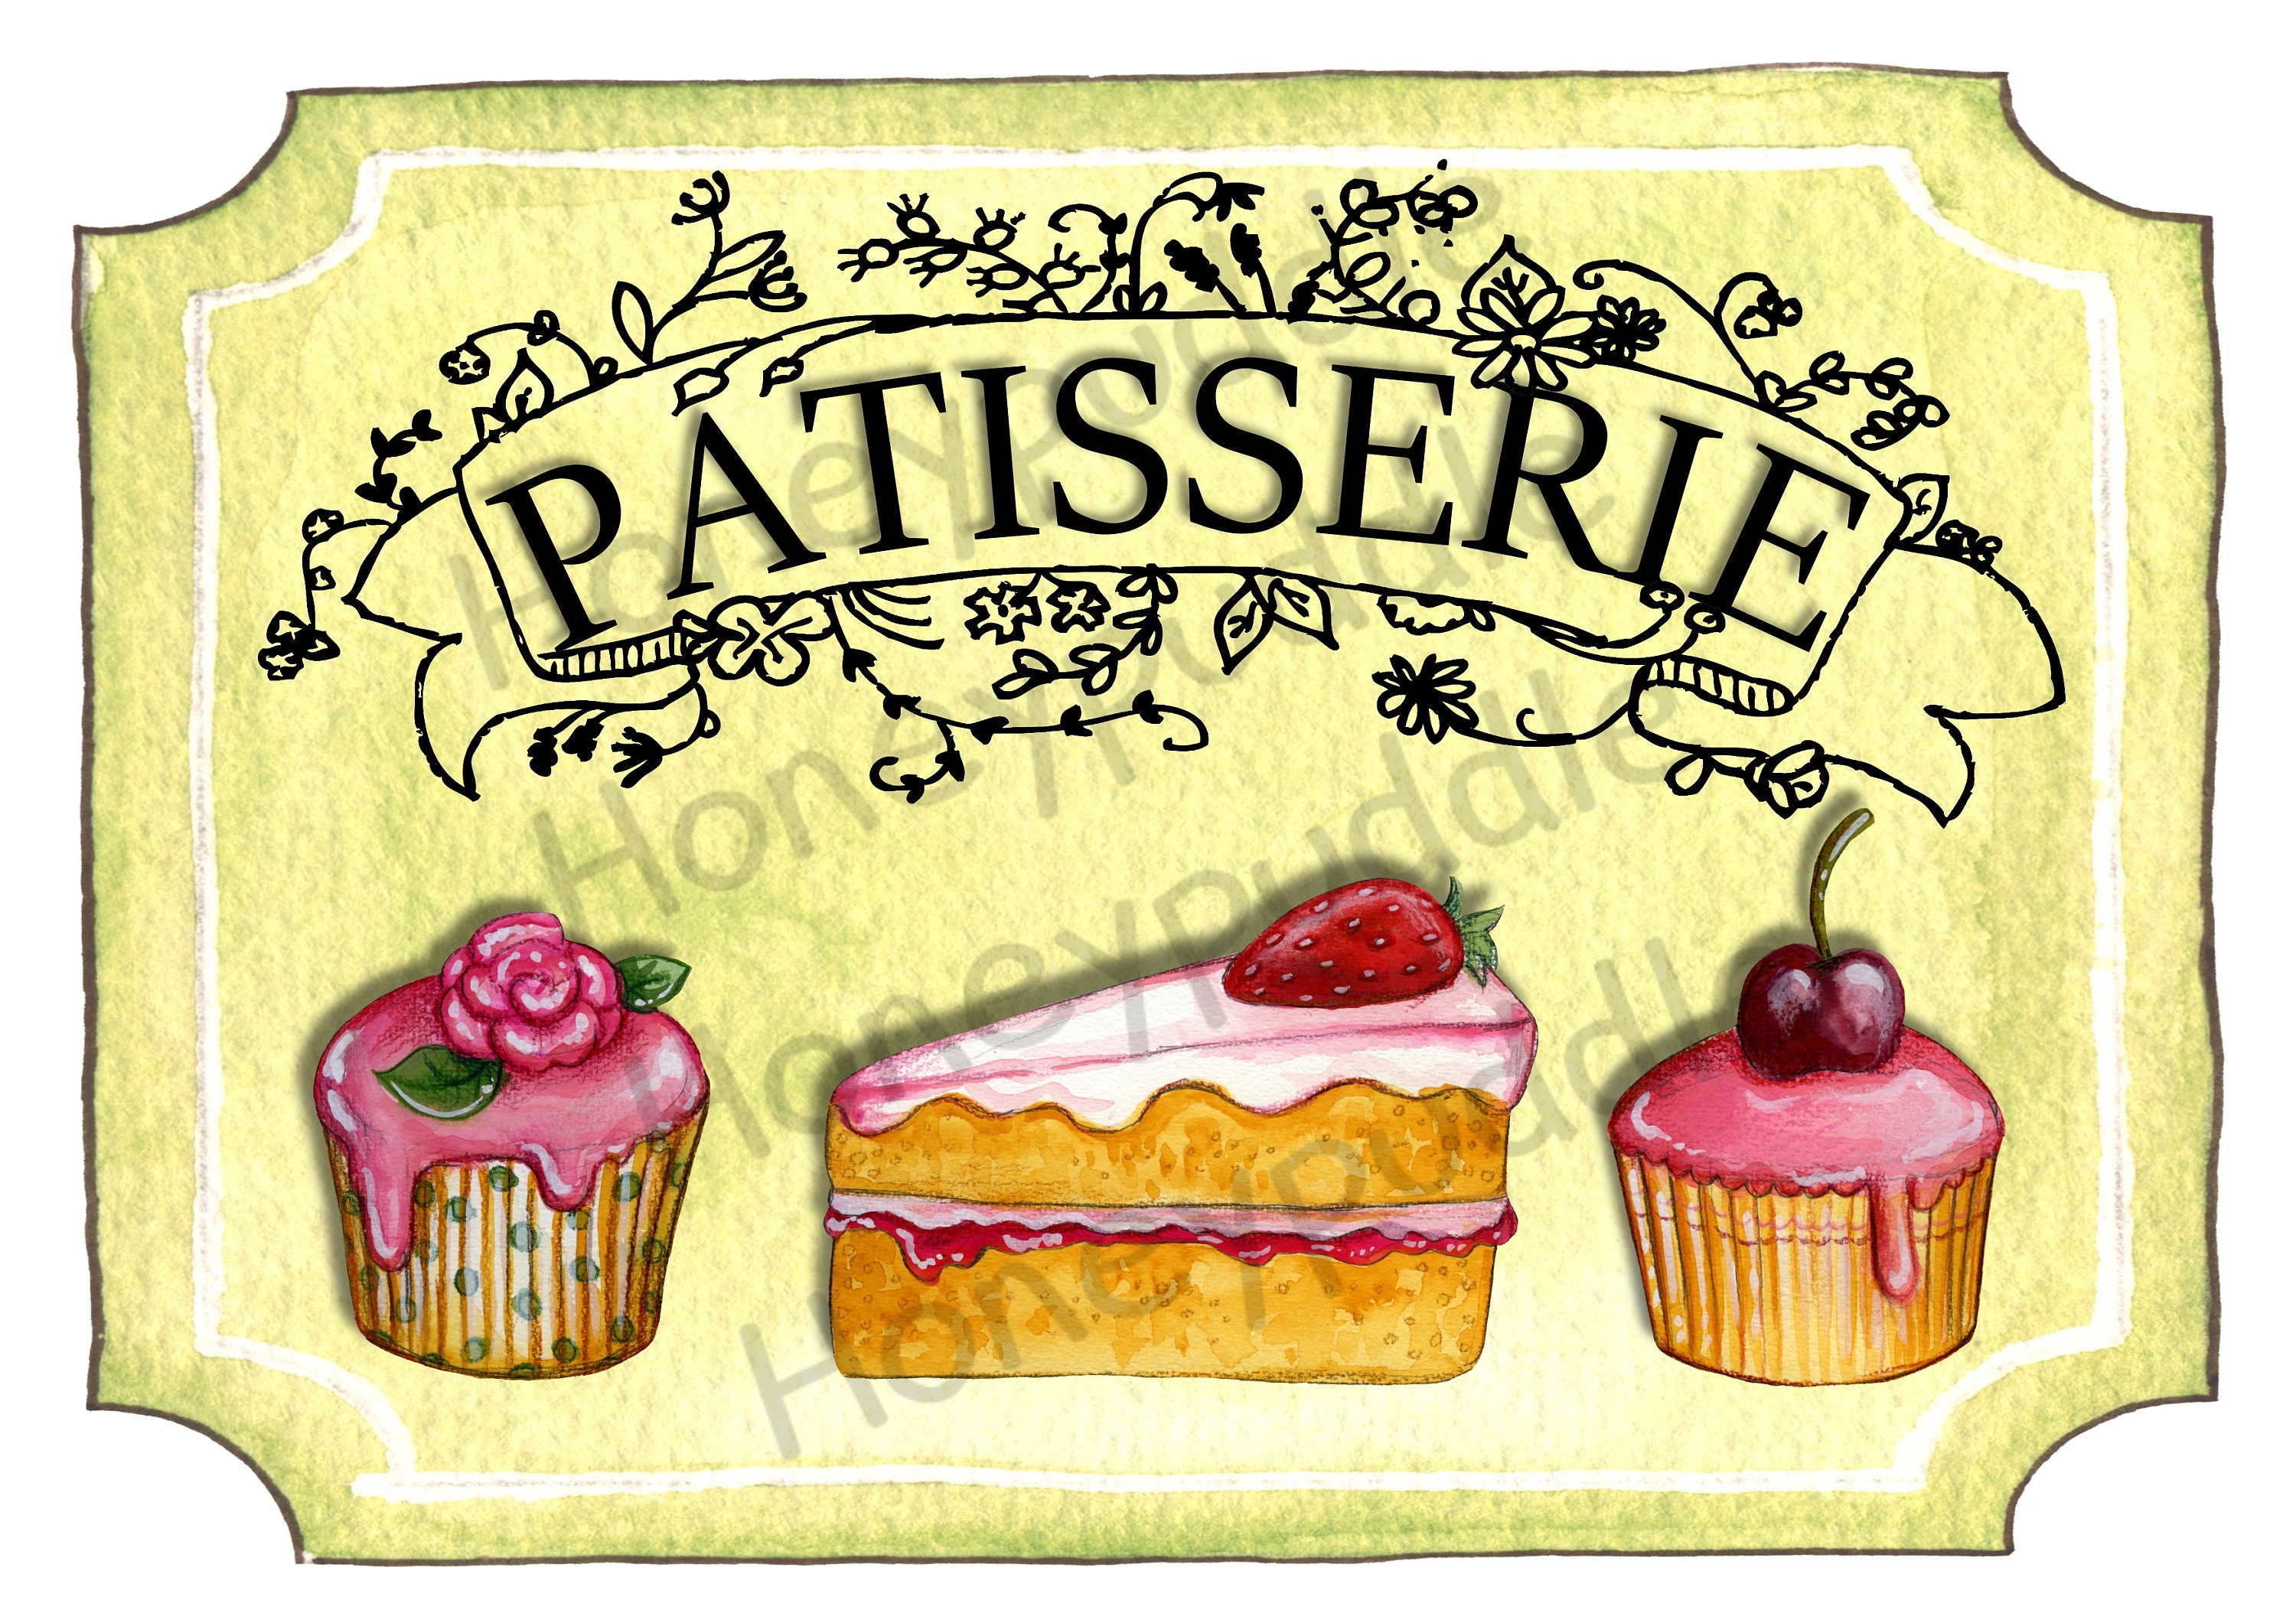 Patisserie Sign Art Print A4 Wall Art Cake Shop French Porn Photo Hd